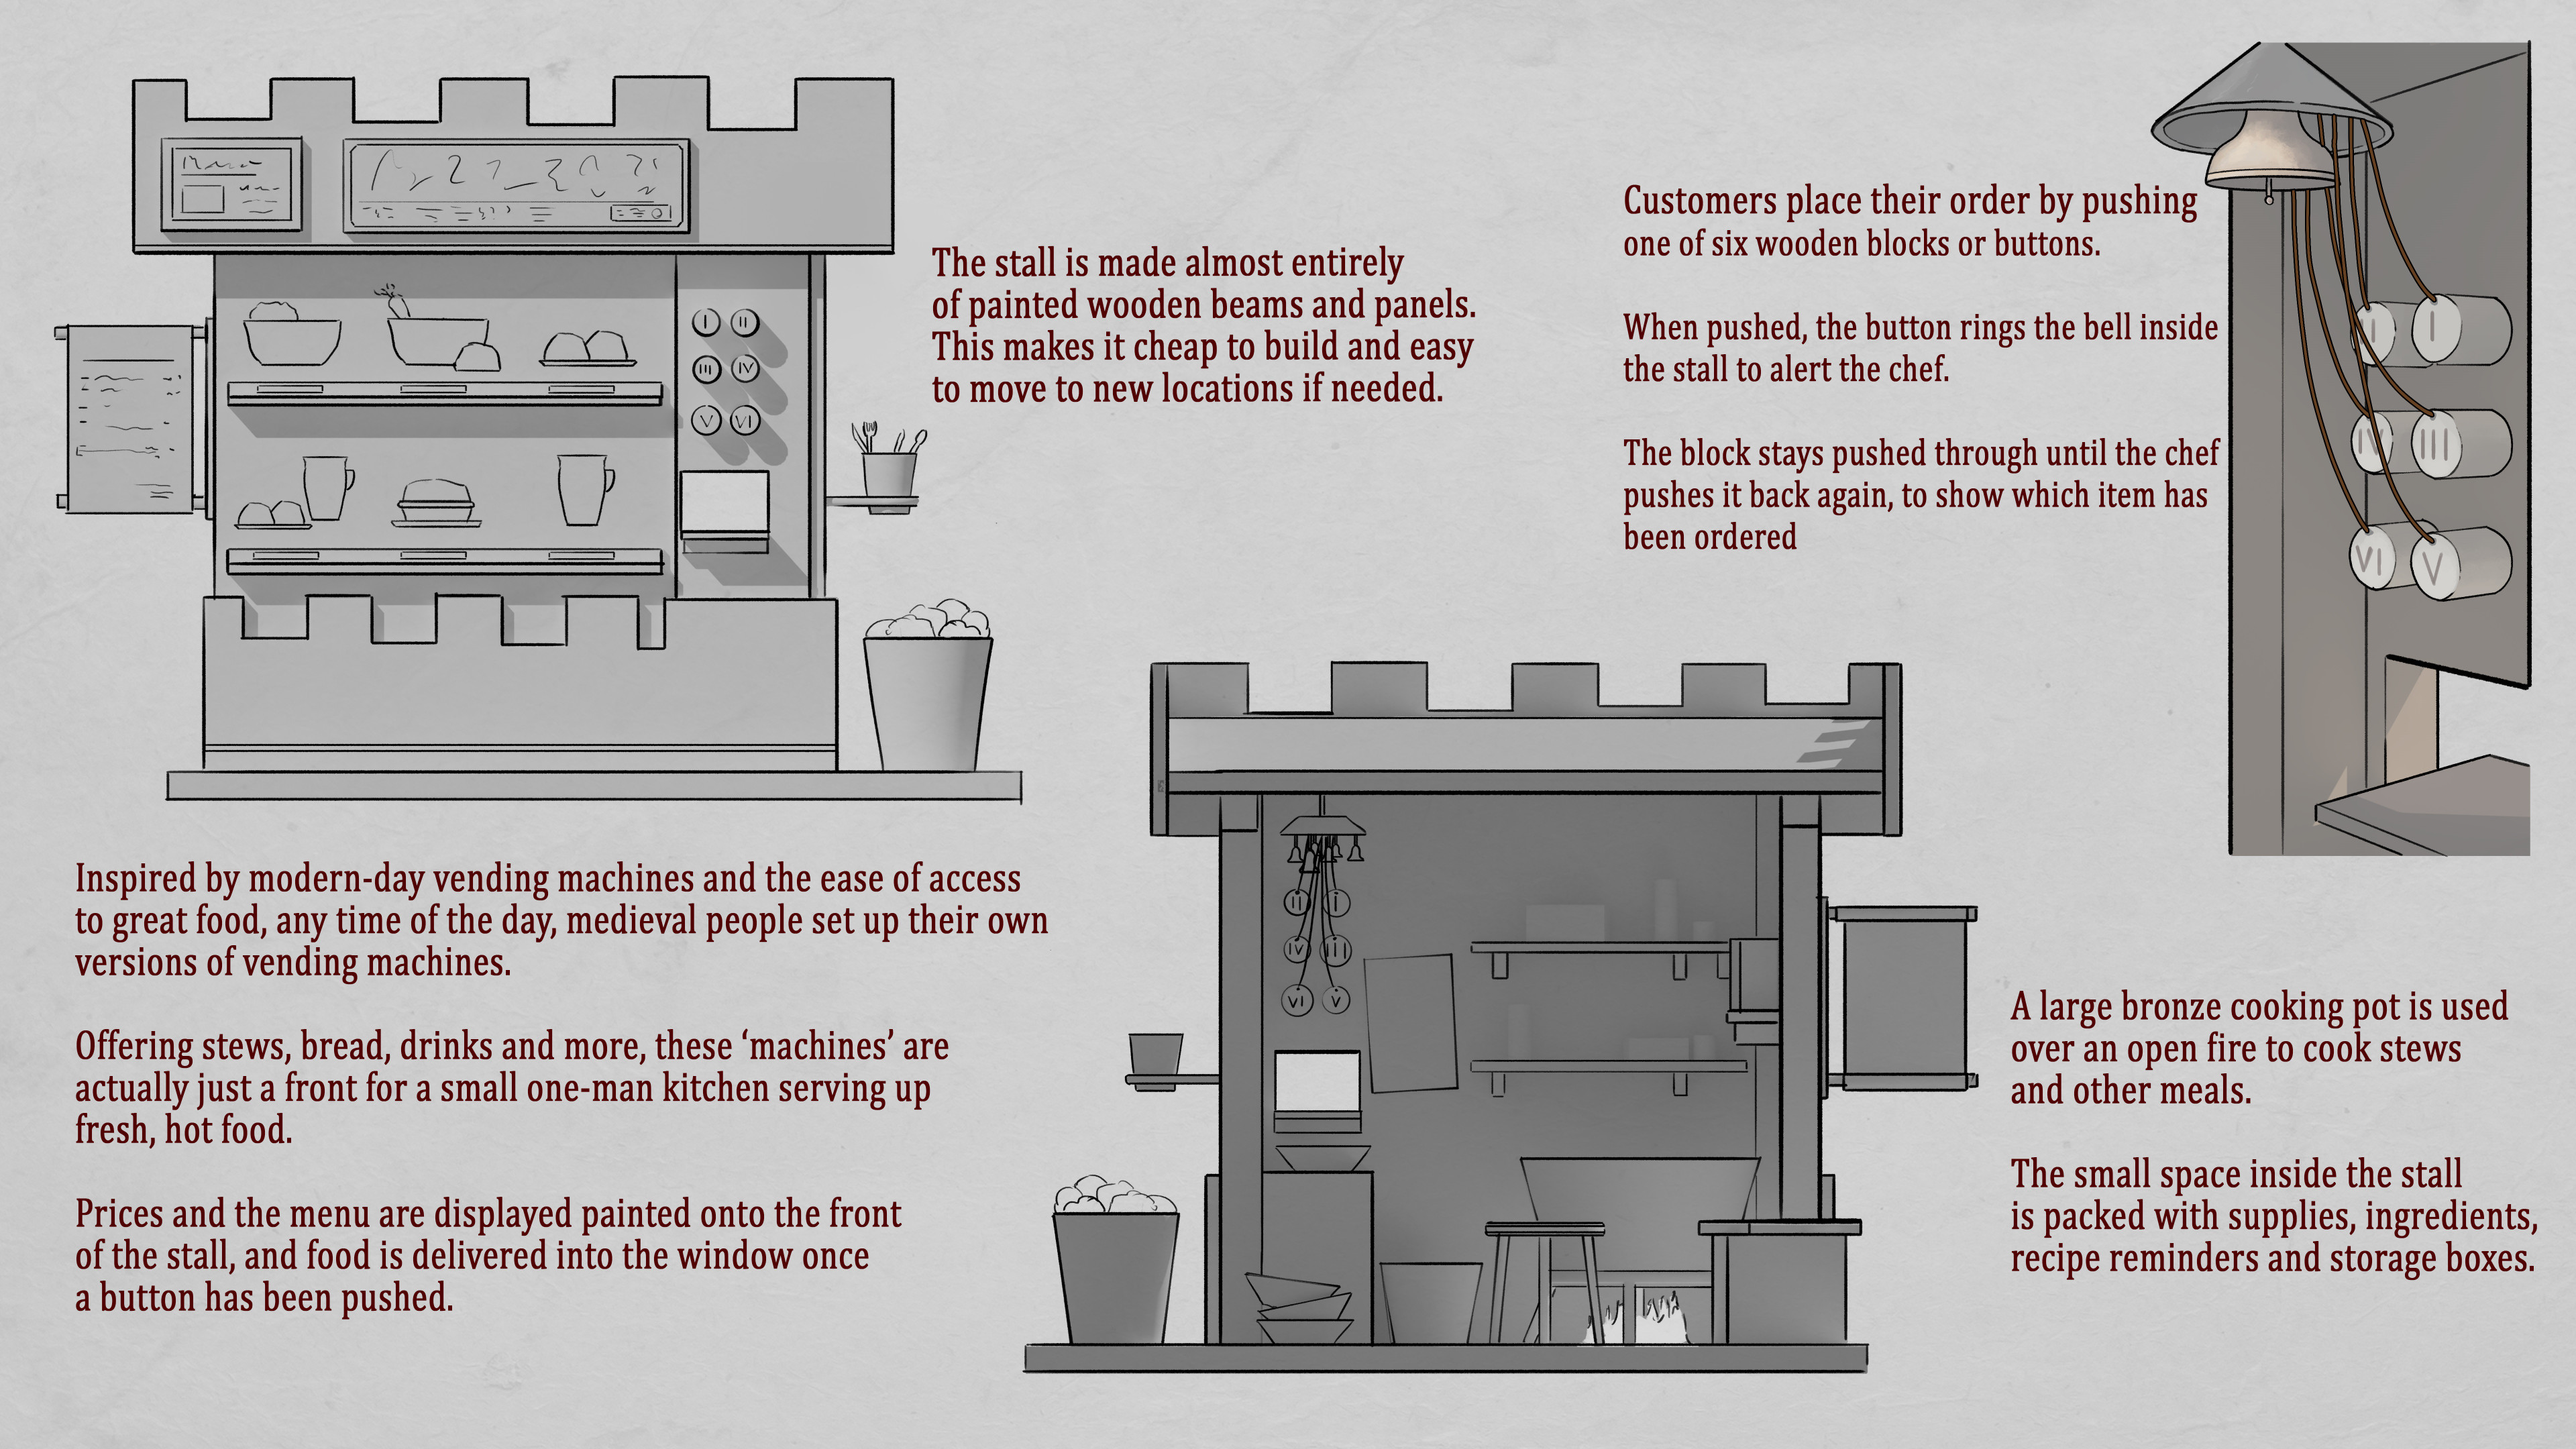 Detail sheet. Customers would order by pushing a wooden peg through the front, which rings a bell for the chef.